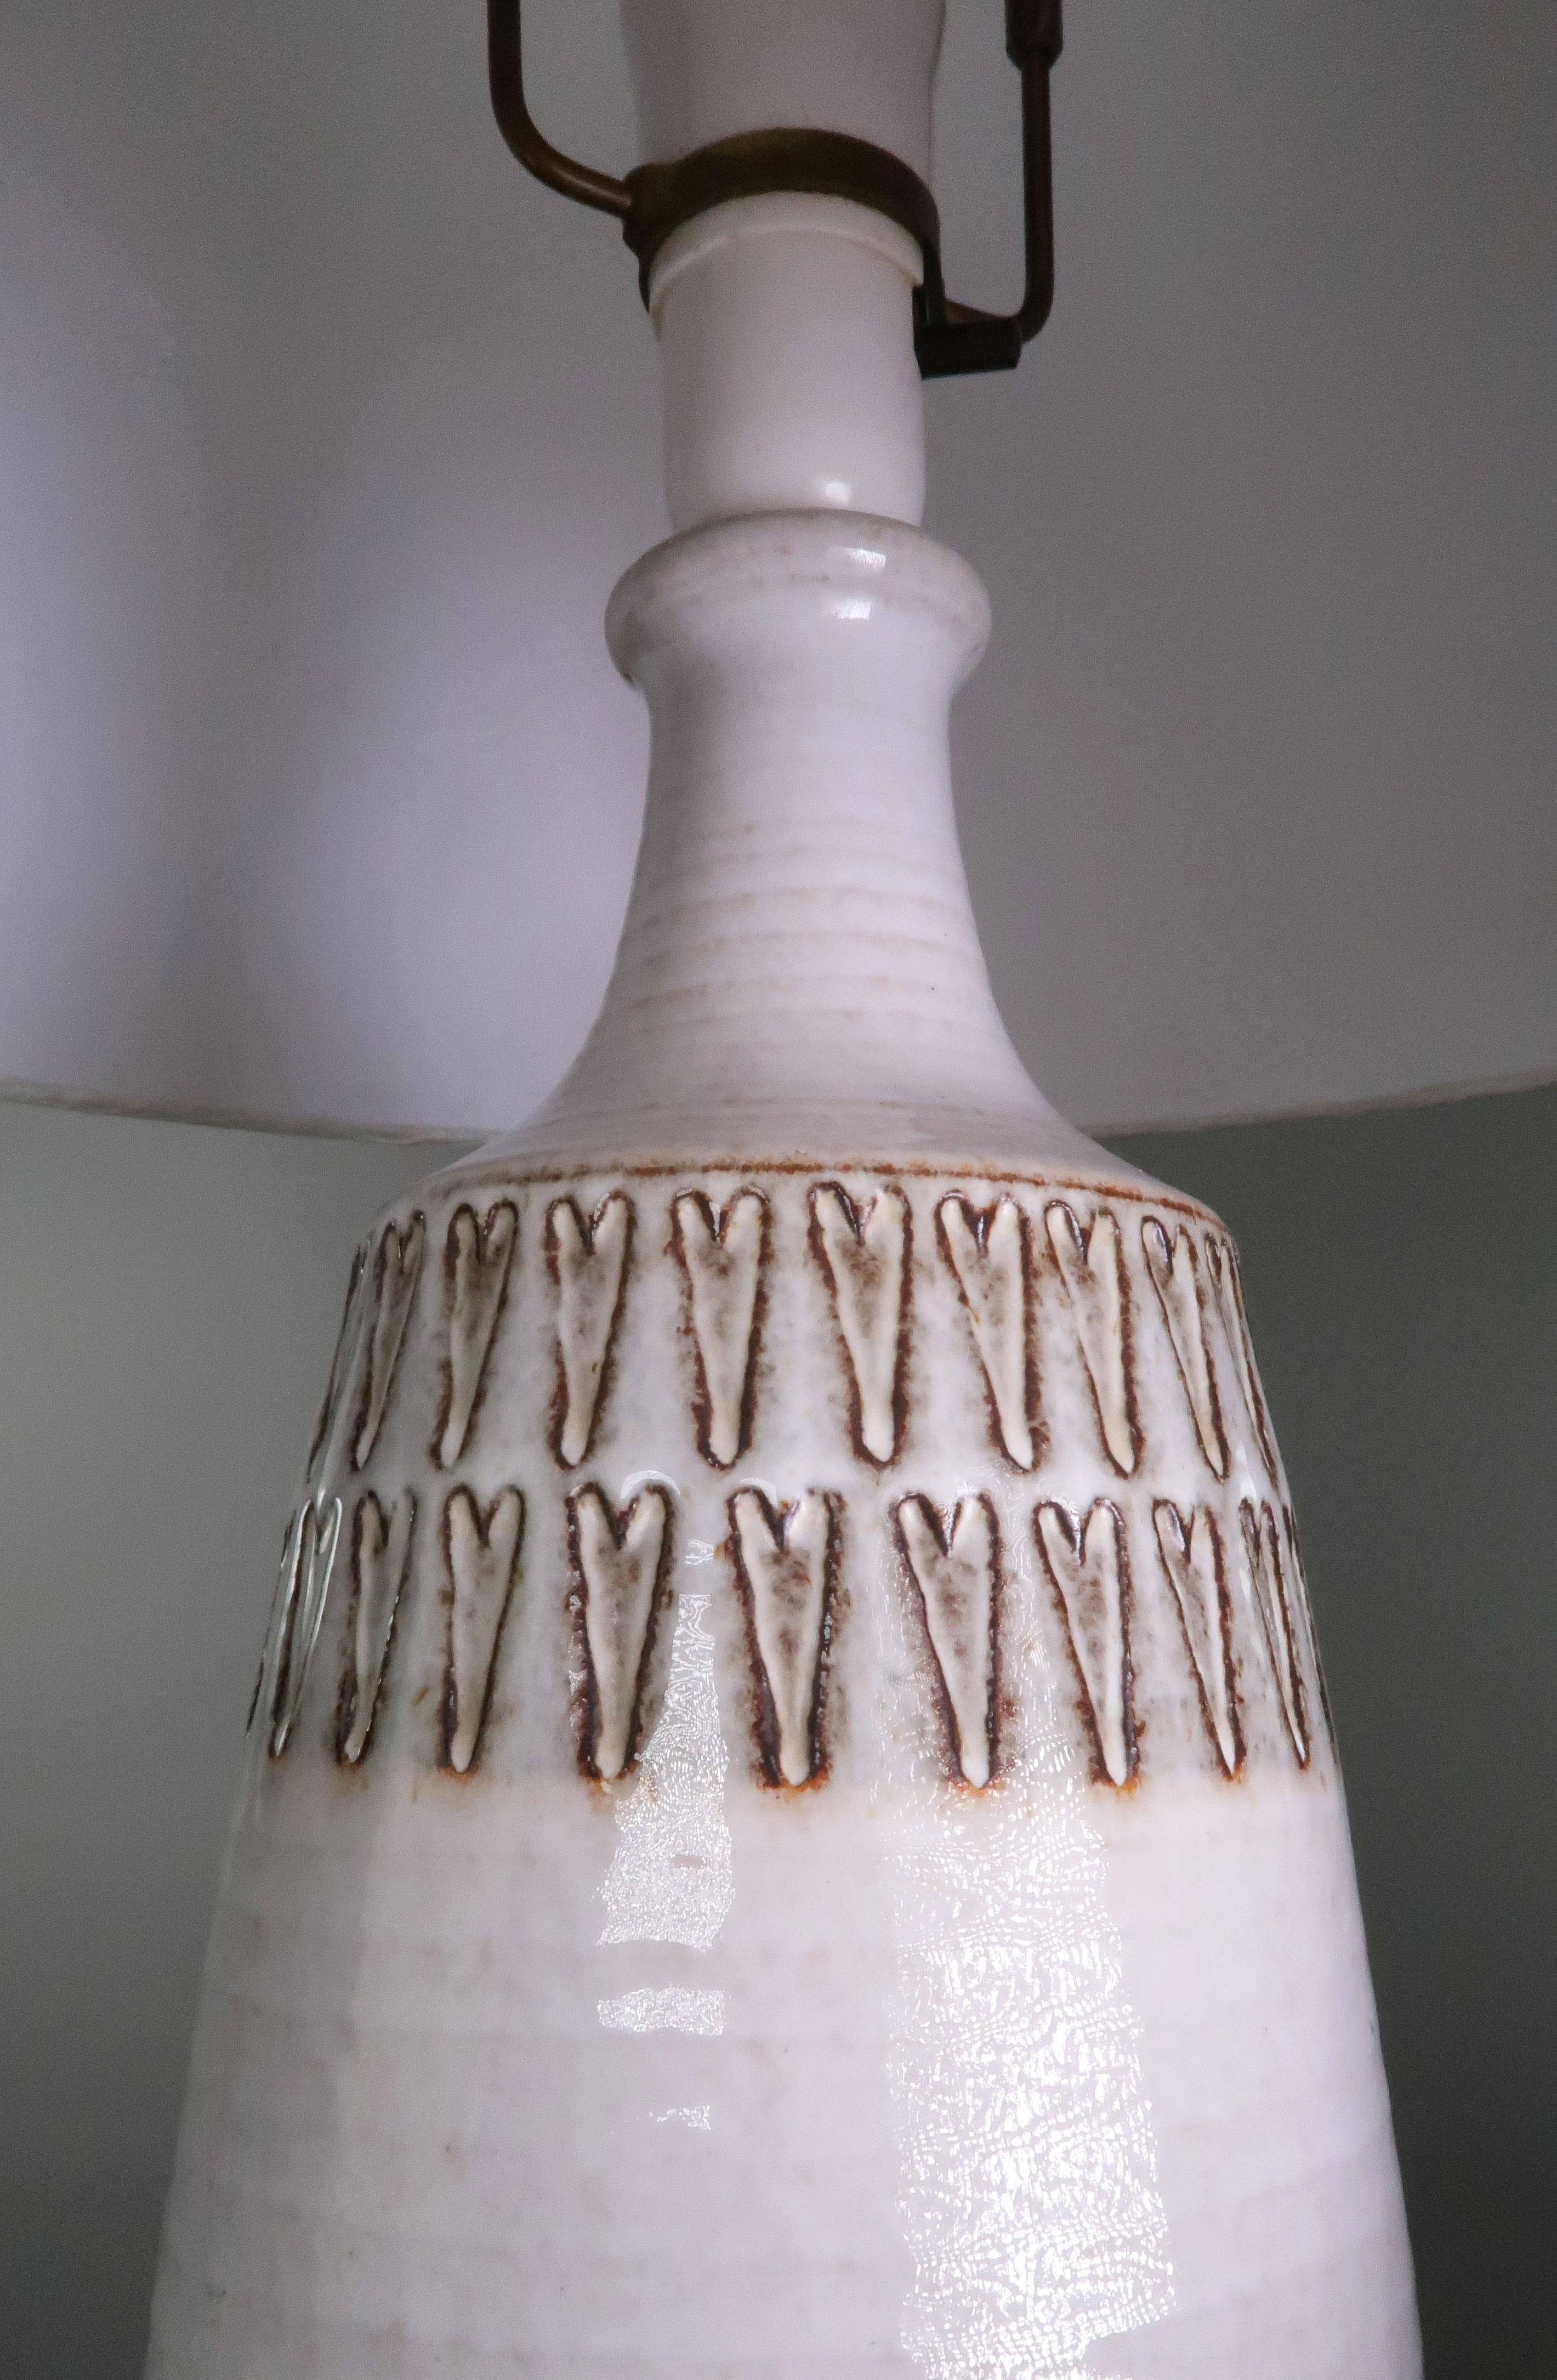 Handmade and hand decorated tall, beautiful and timeless Danish Mid-Century Modern stoneware table lamp from the early 1960s. Manufactured on the Danish island of Bornholm. Warm white, light grey glaze with heart shaped geometric pattern around top